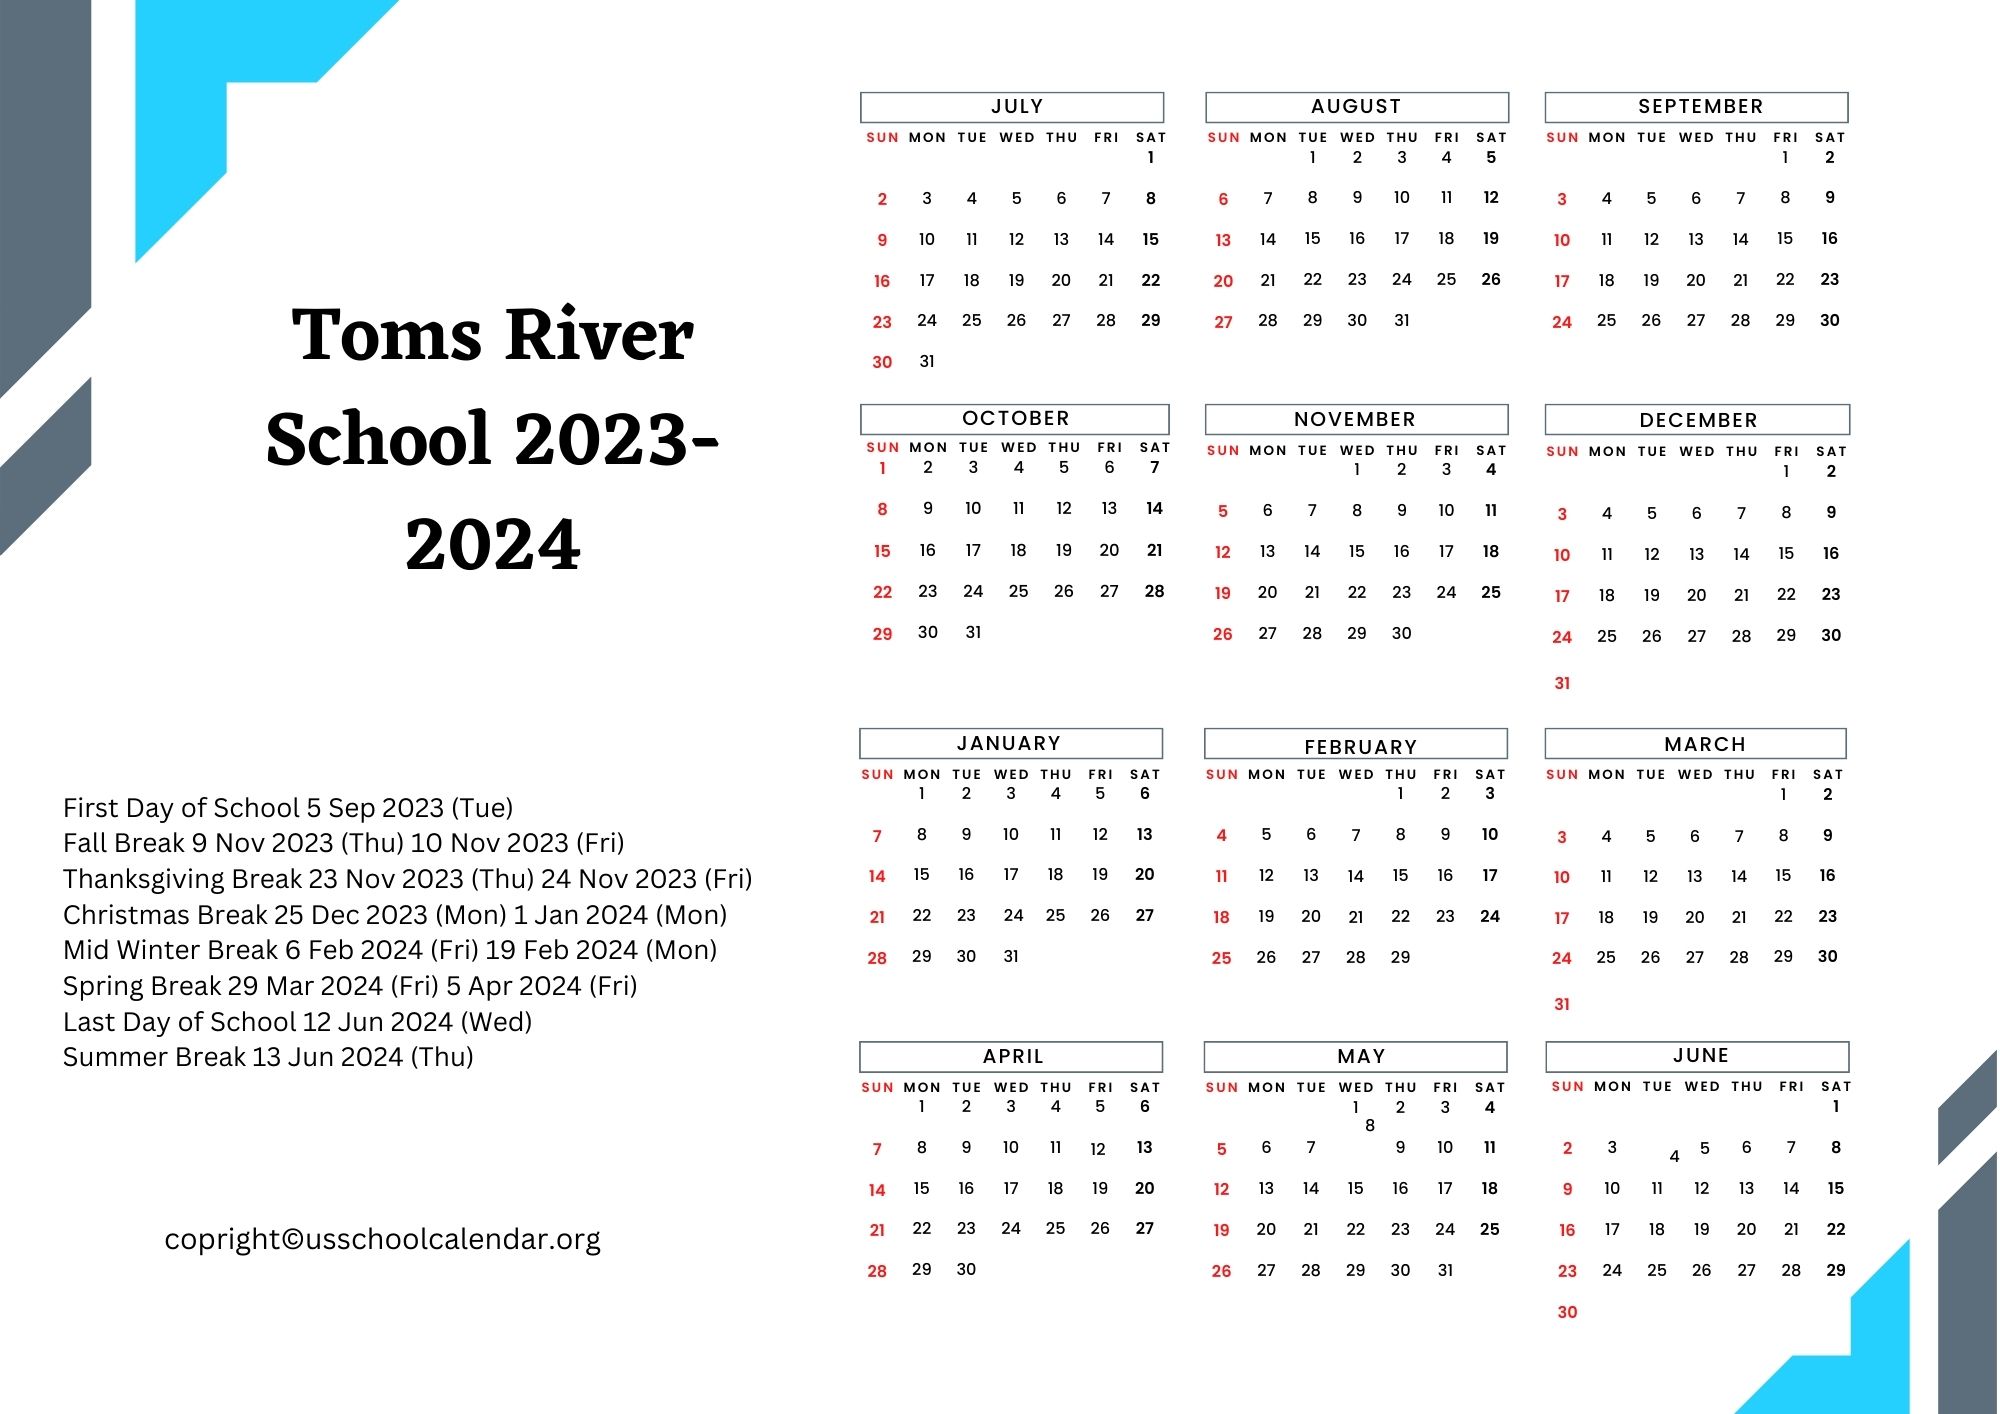 toms-river-school-calendar-with-holidays-2023-2024